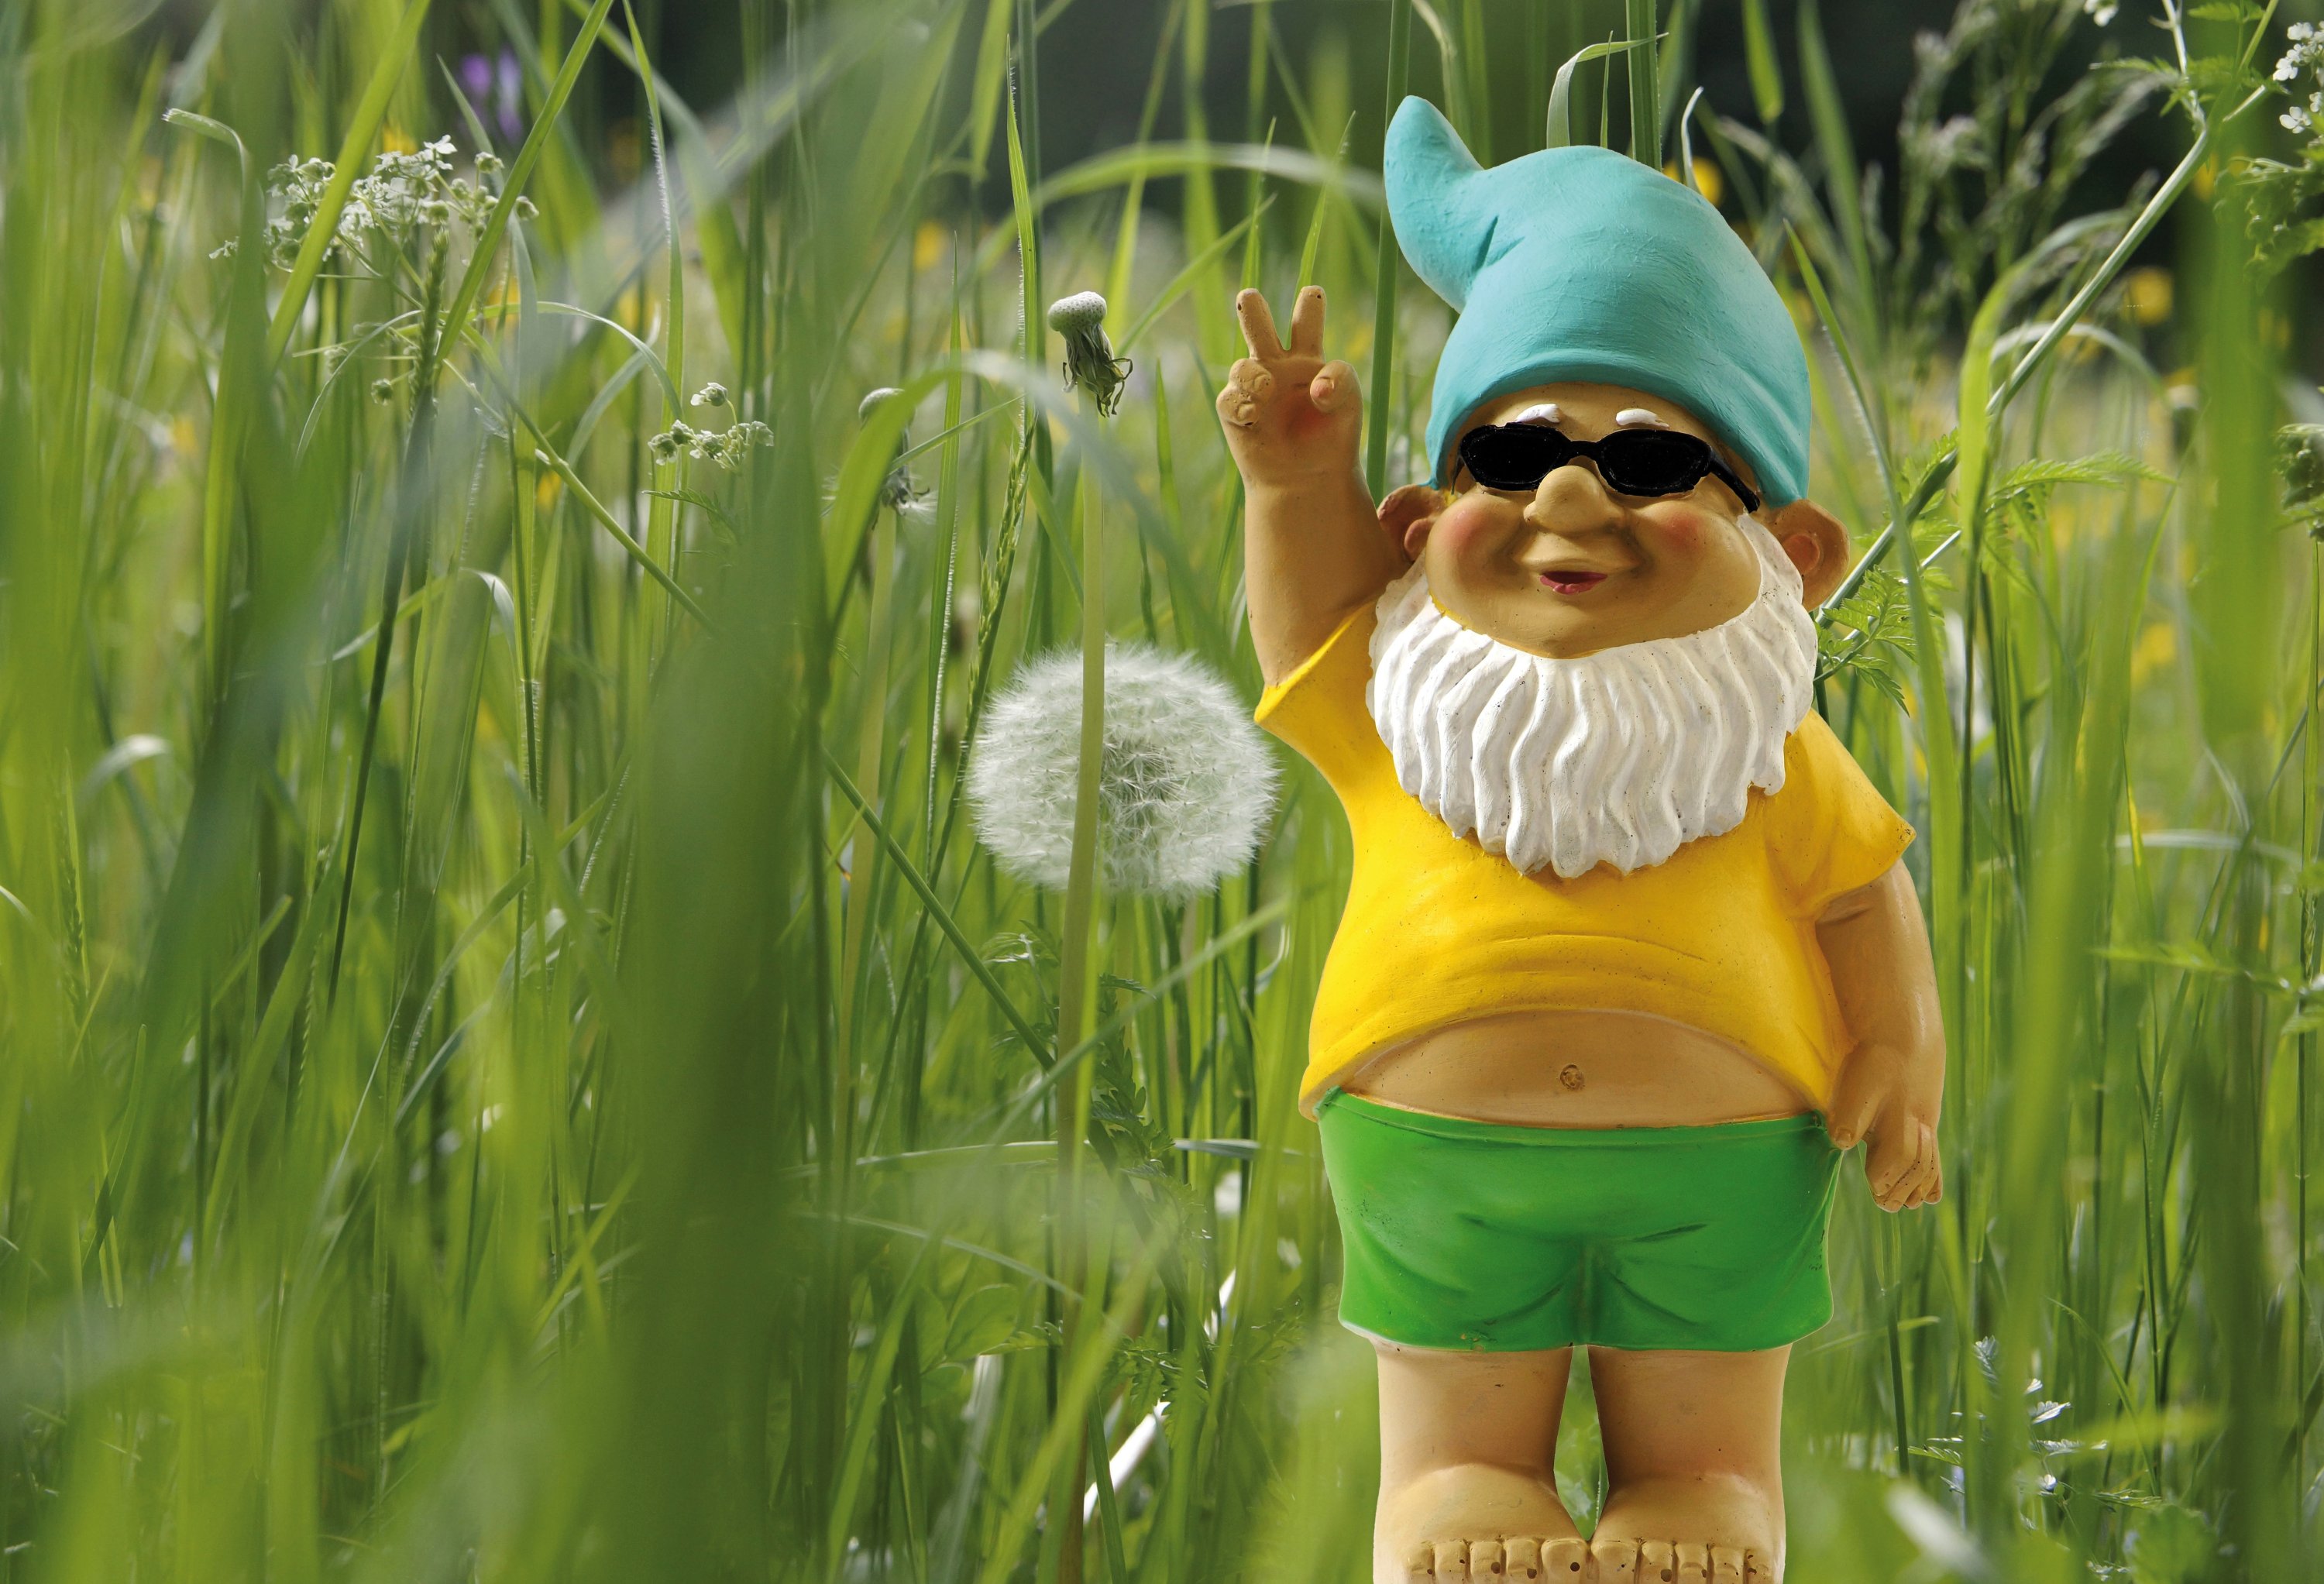 Garden gnomes come in all sizes and colors in recent times. (Shutterstock) 